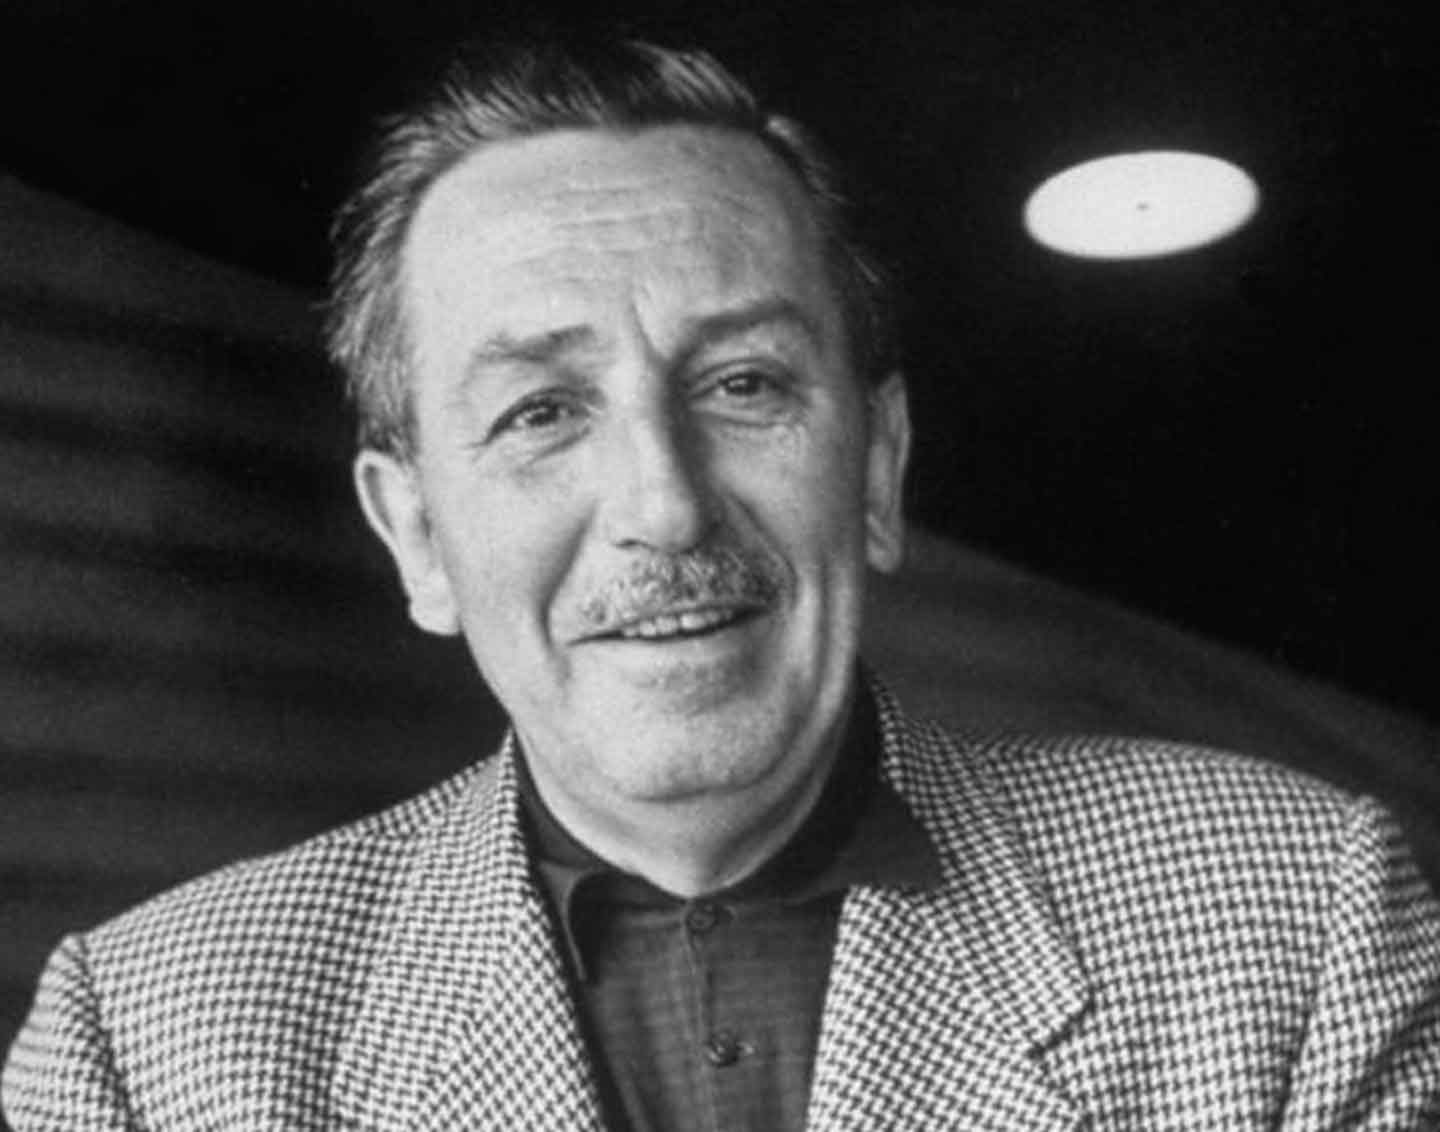 Quora: “Does any one at Disney still think in terms of ‘What would Walt Disney do?'”